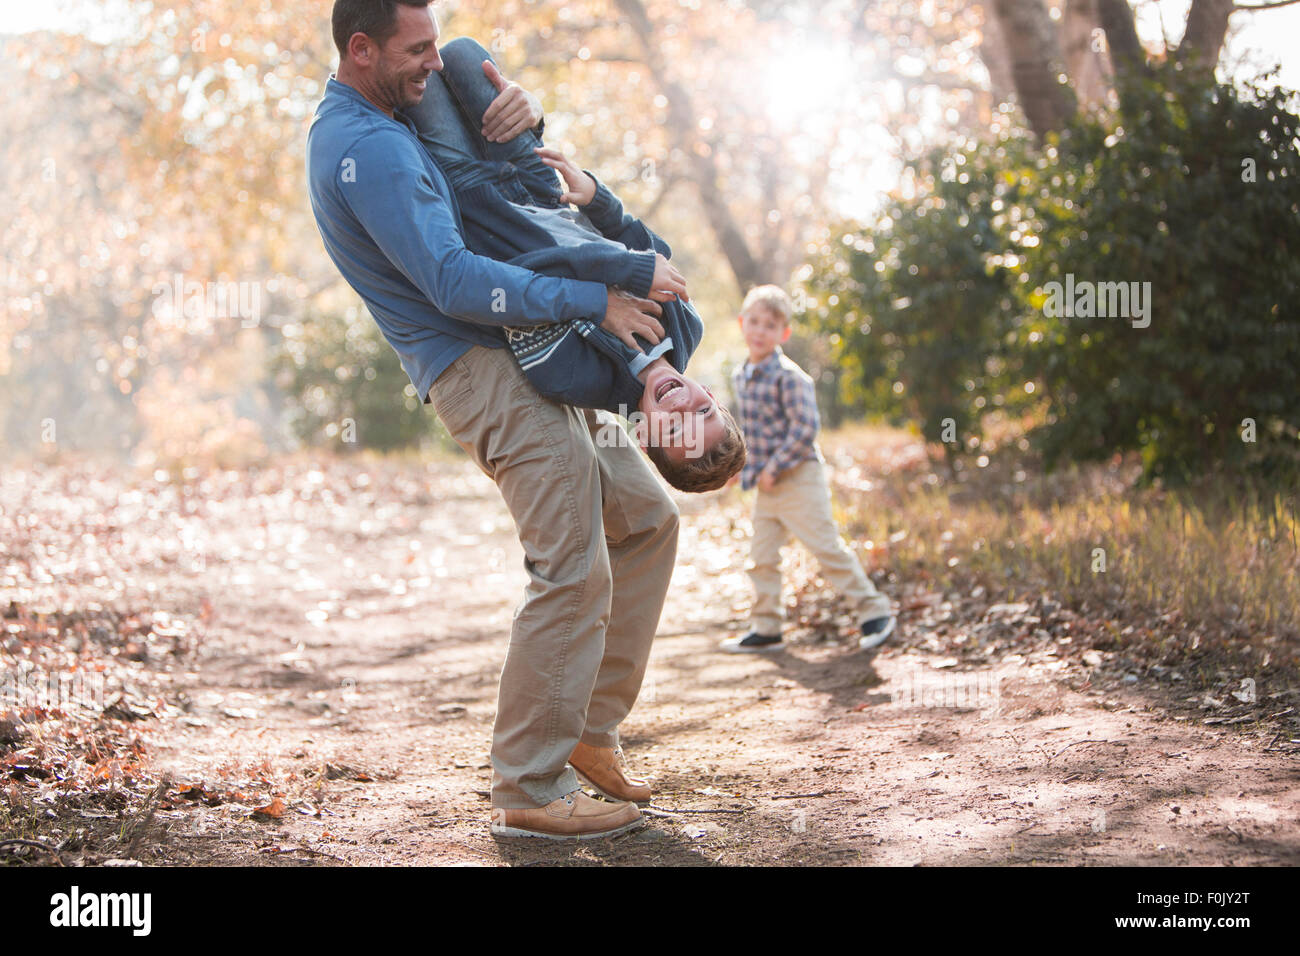 Playful father lifting son upside-down on path in woods Stock Photo